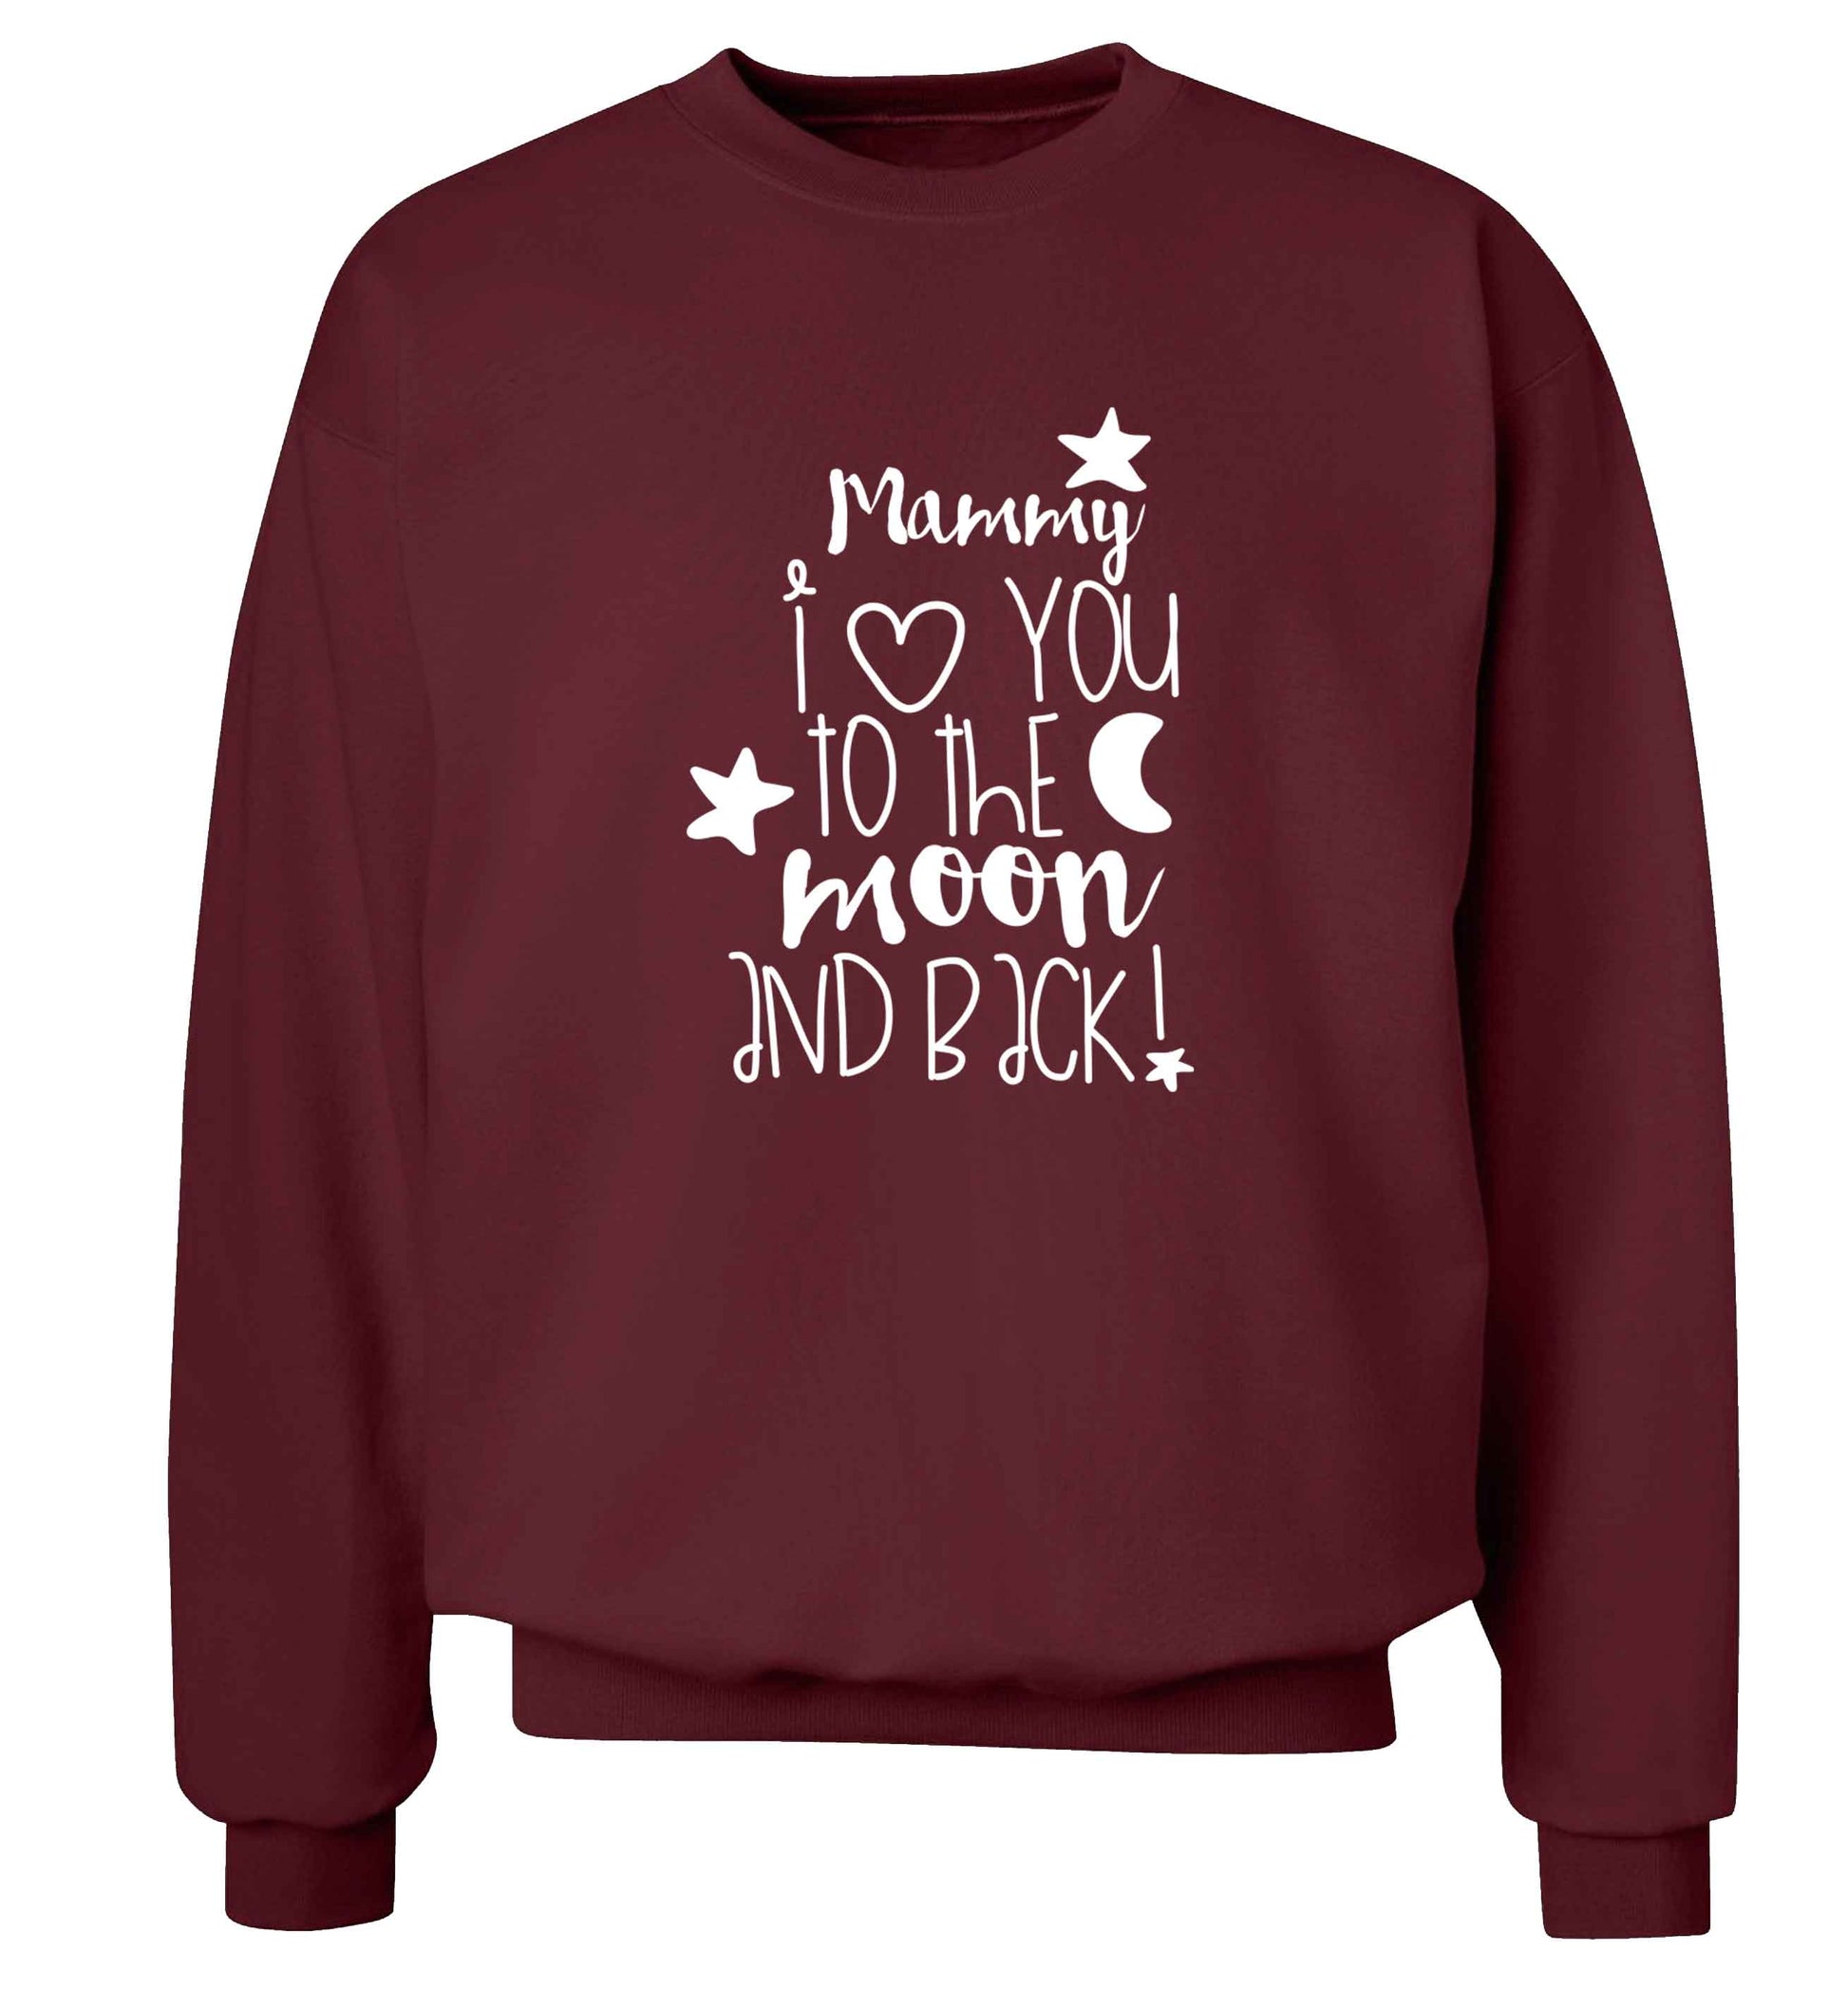 Mammy I love you to the moon and back adult's unisex maroon sweater 2XL